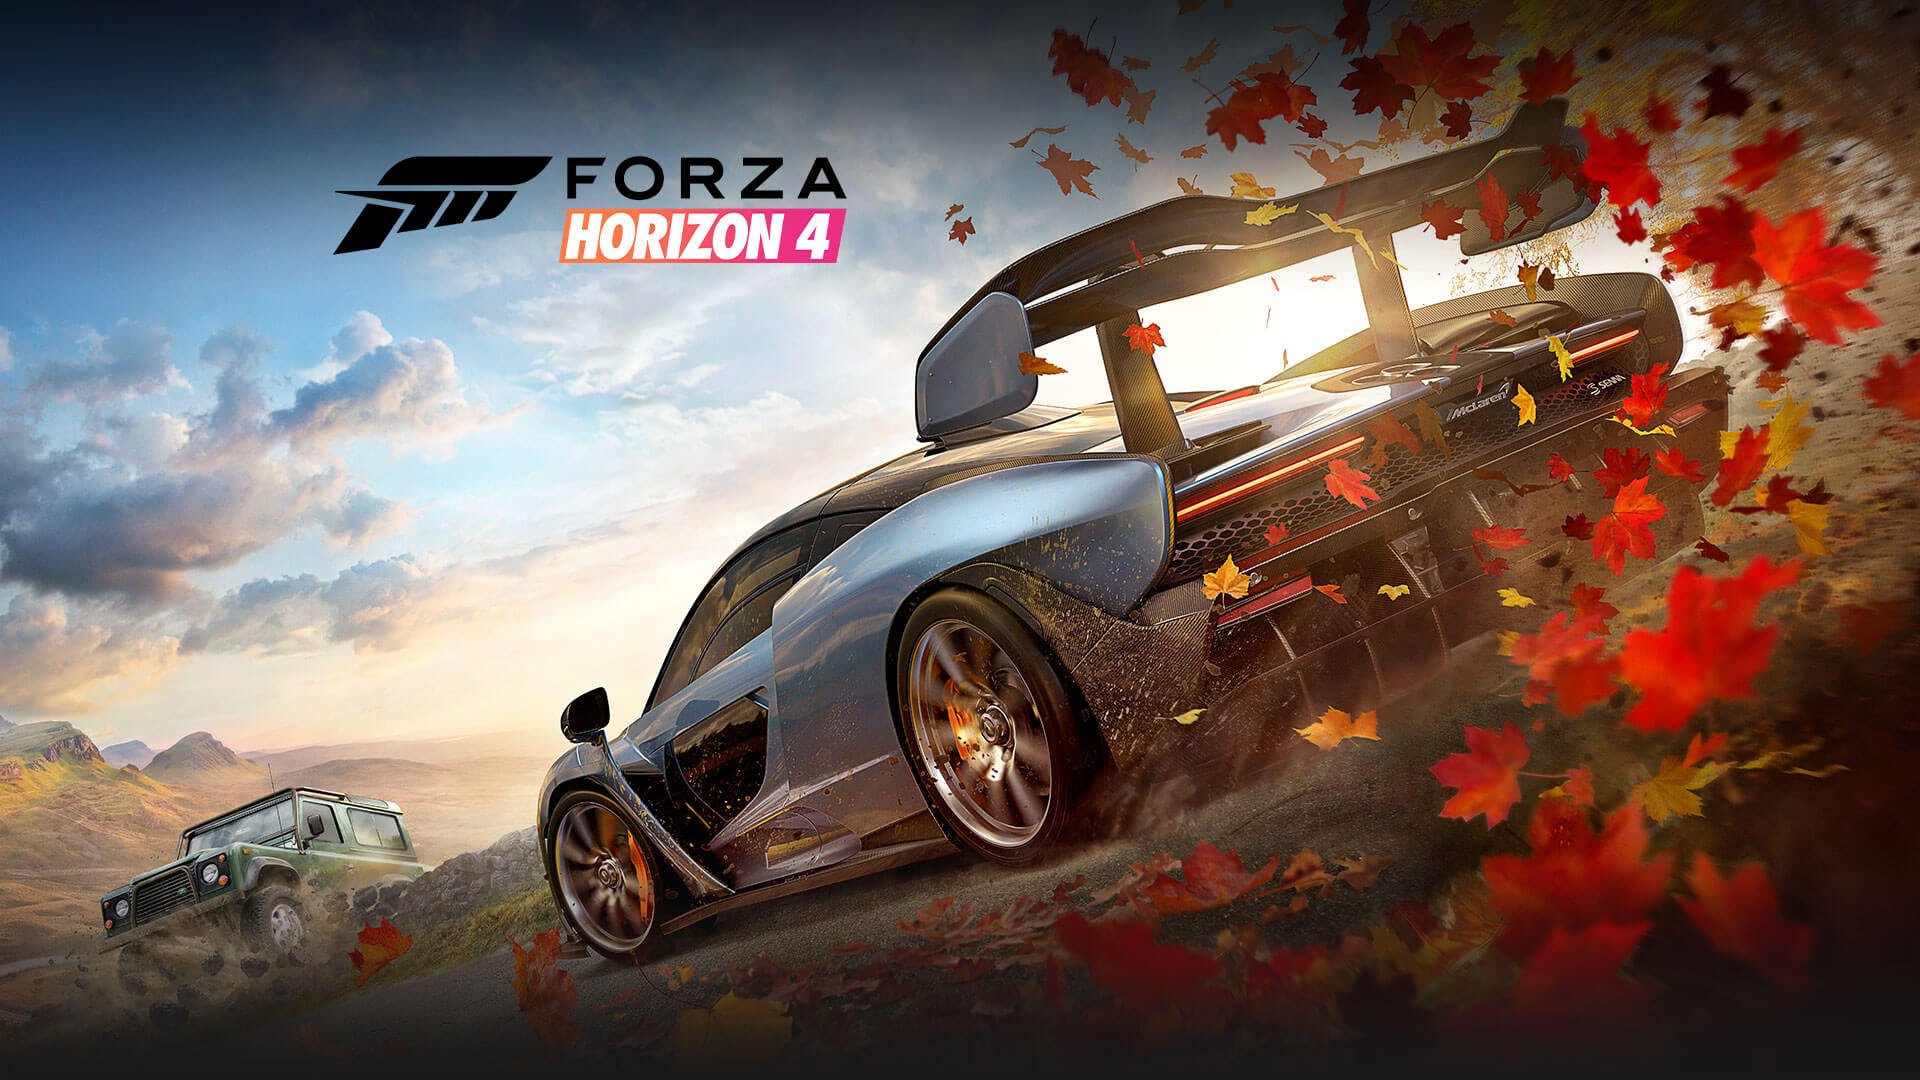 Forza Horizon 5 Hot Wheels release date, UK launch time & pre-order